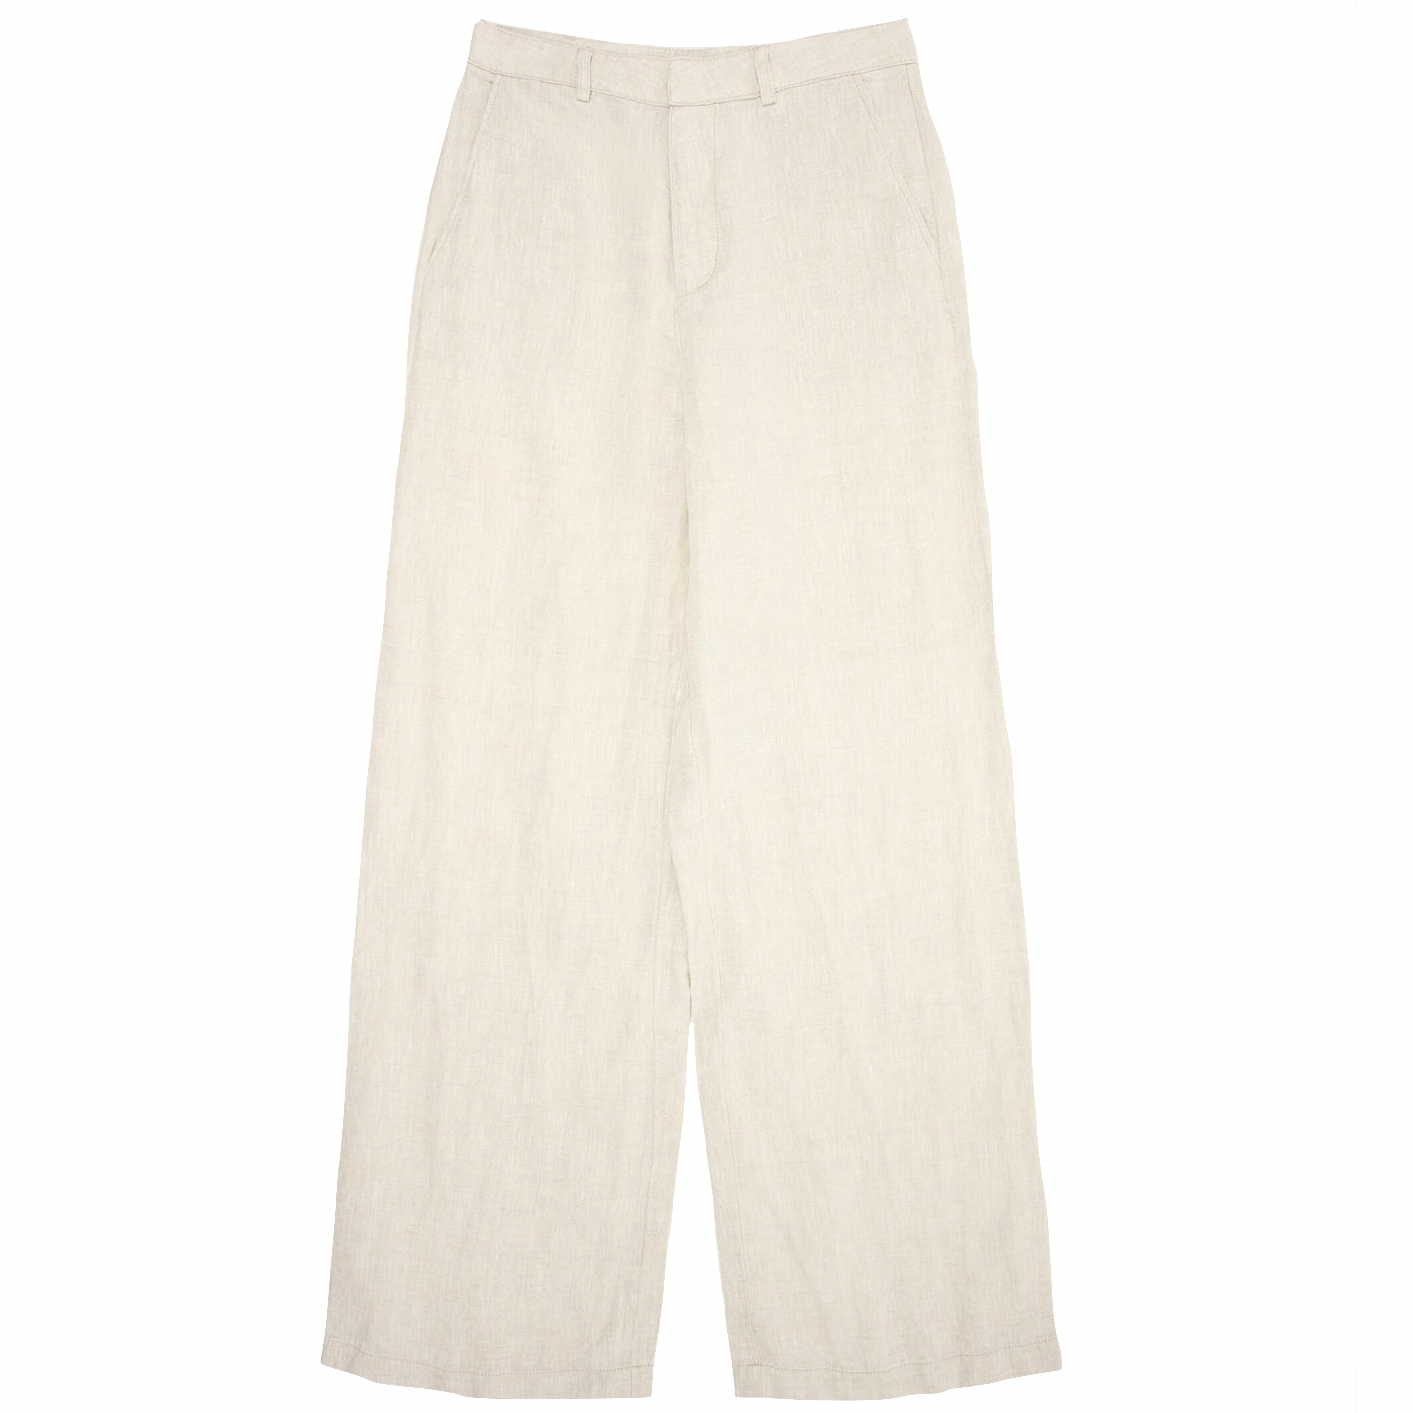 KnowledgeCotton Apparel KnowledgeCotton, Posey natural linen pants, light feather grey, S